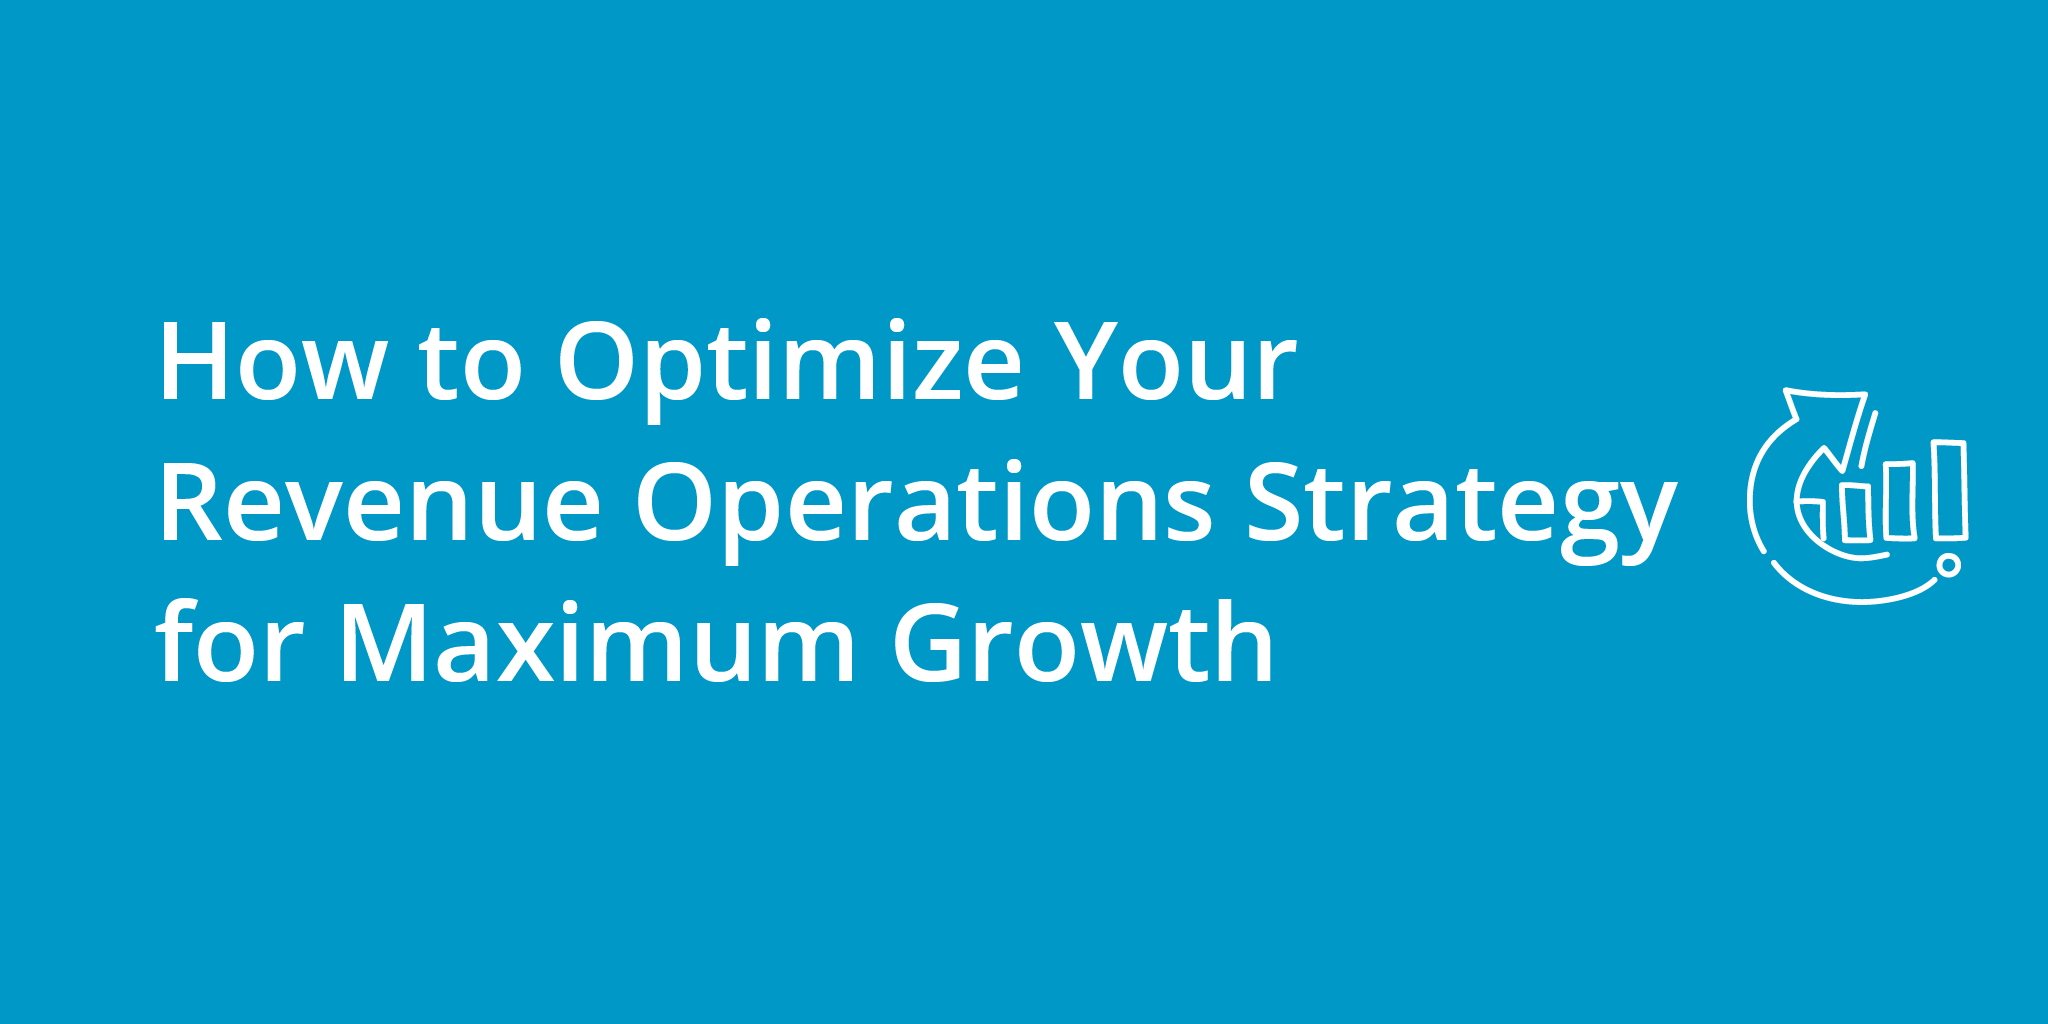 How to Optimize Your Revenue Operations Strategy for Maximum Growth